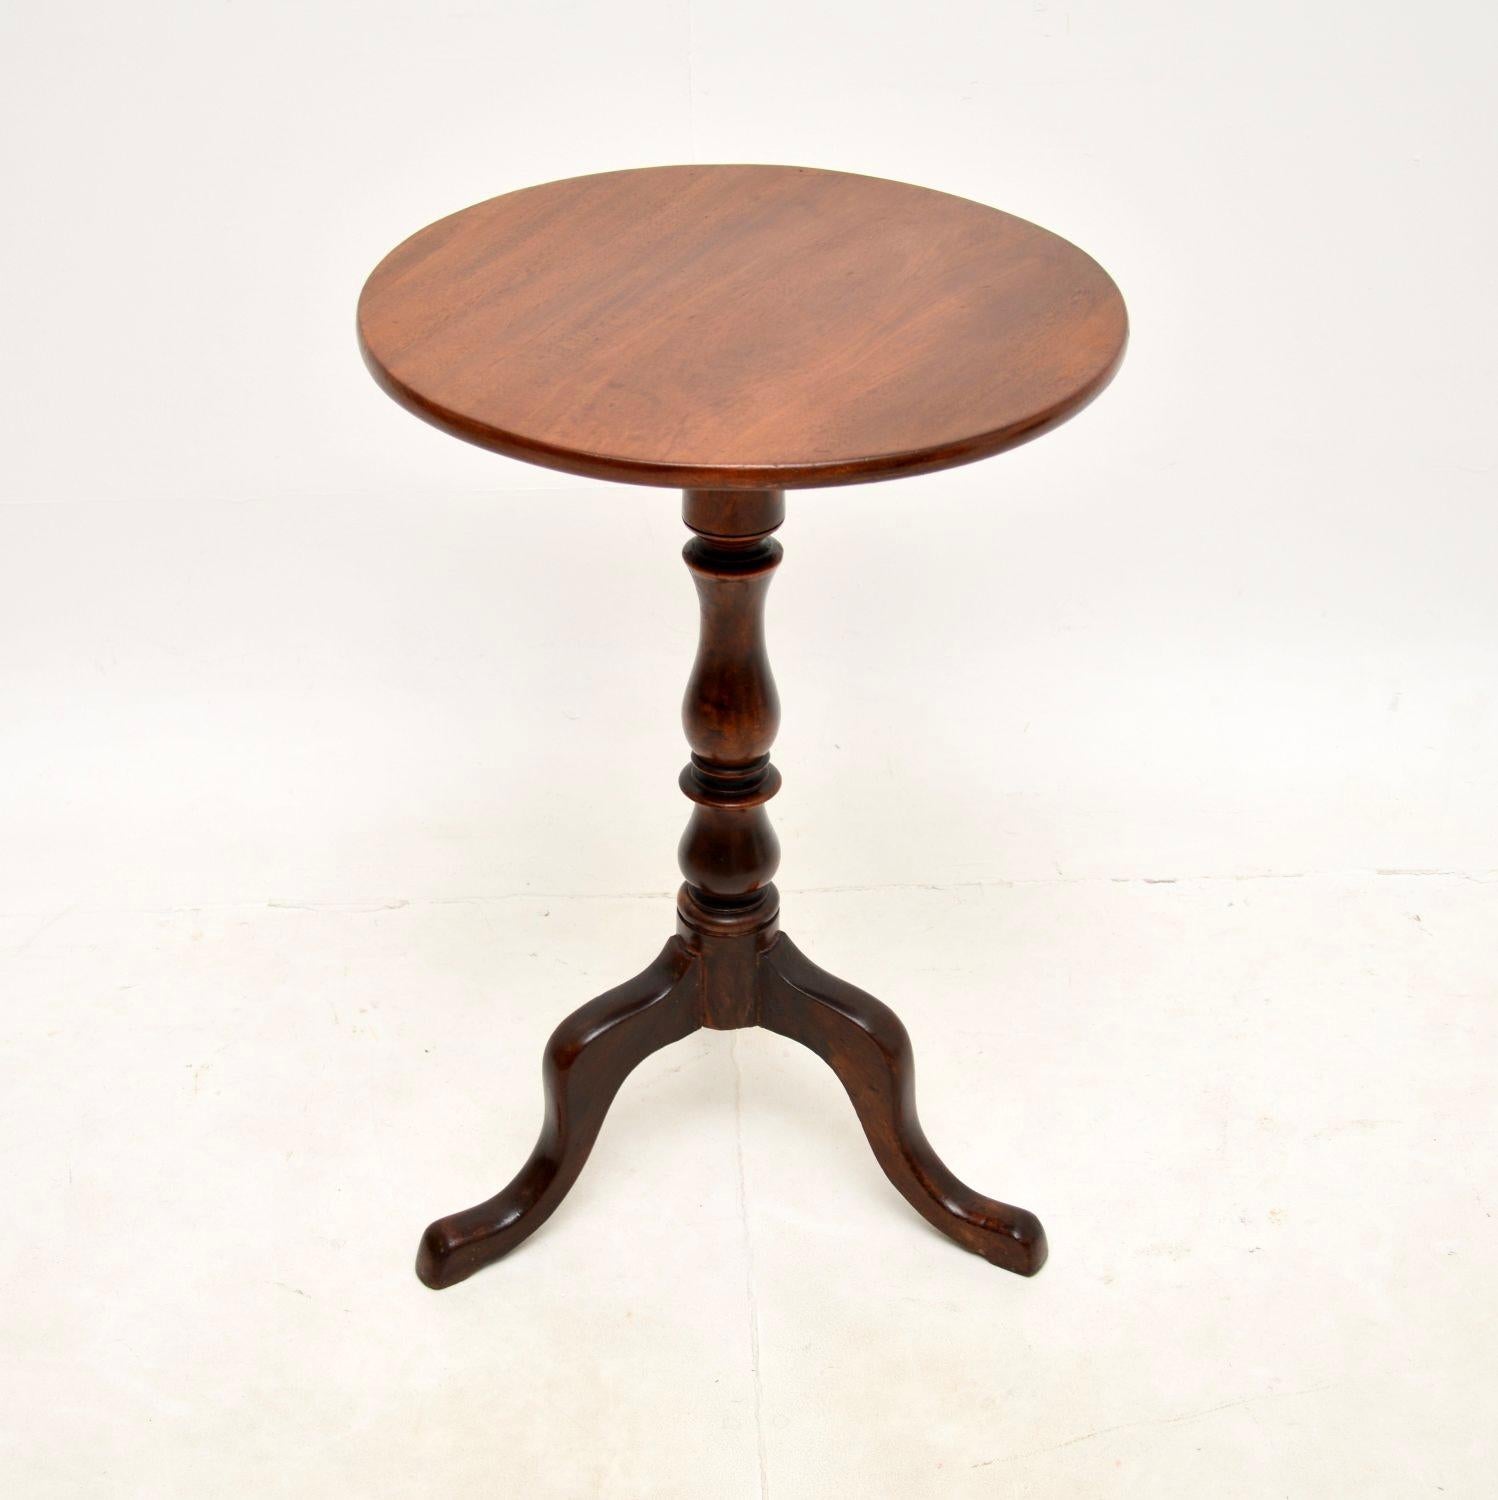 A wonderful original antique Georgian tilt top occasional table. This was made in England, it dates from around the 1790-1810 period.

The quality is superb, this is very well made and is a useful size. The wood has a gorgeous colour tone and